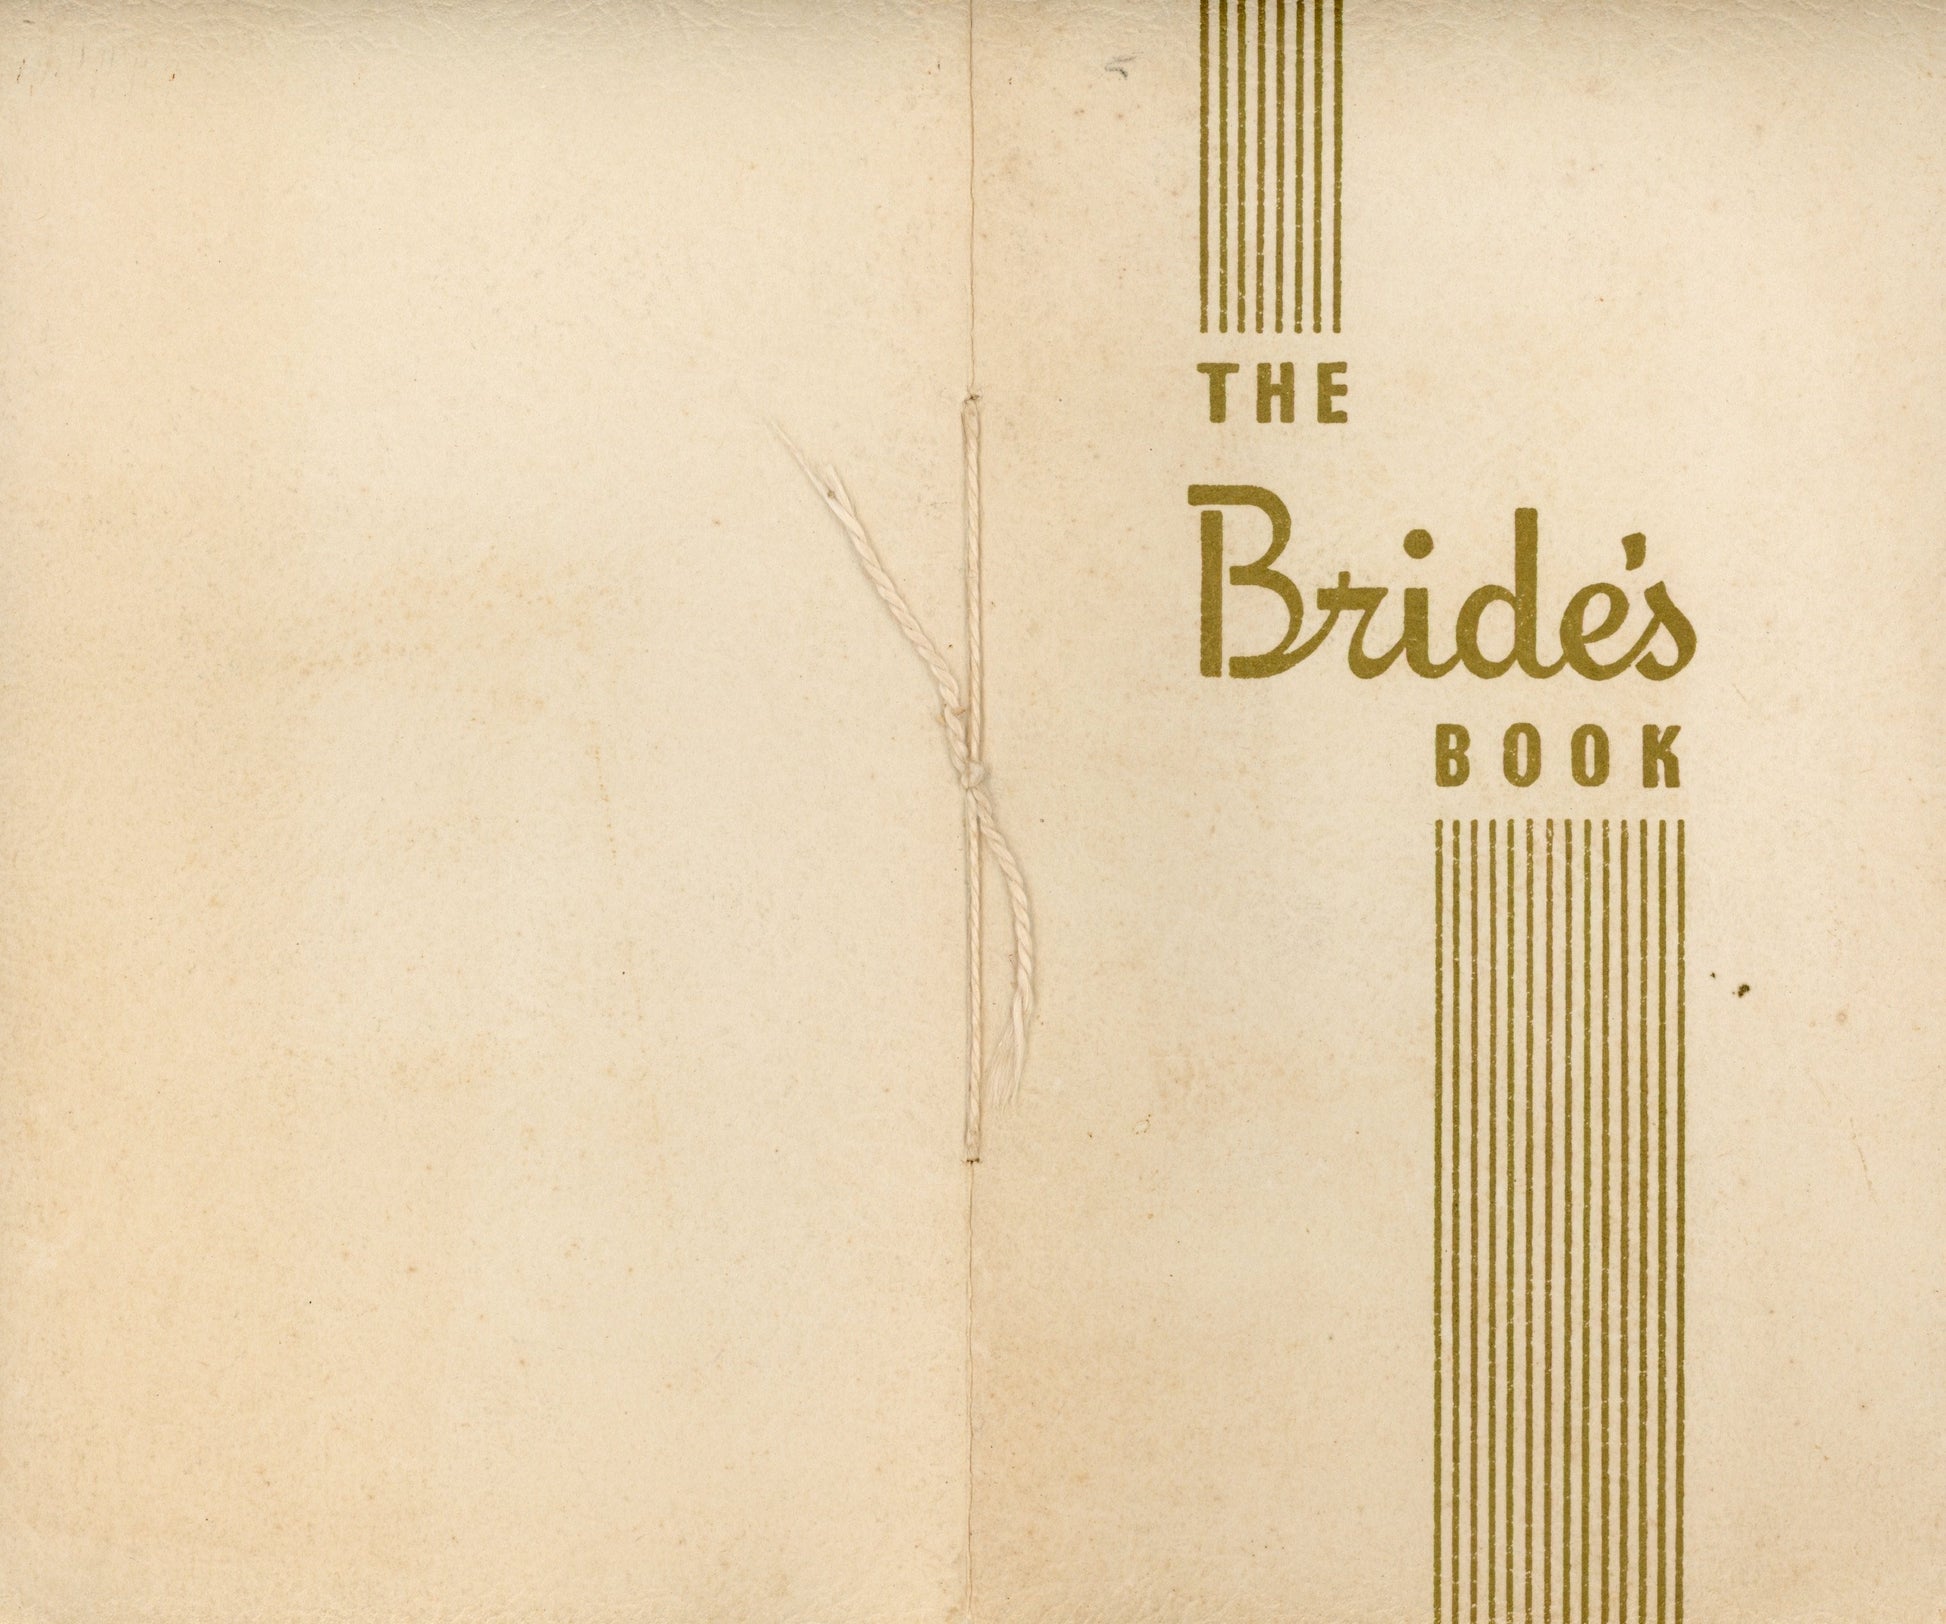 THE BRIDE'S BOOK Published by Montgomery Ward Circa 1955 Unused